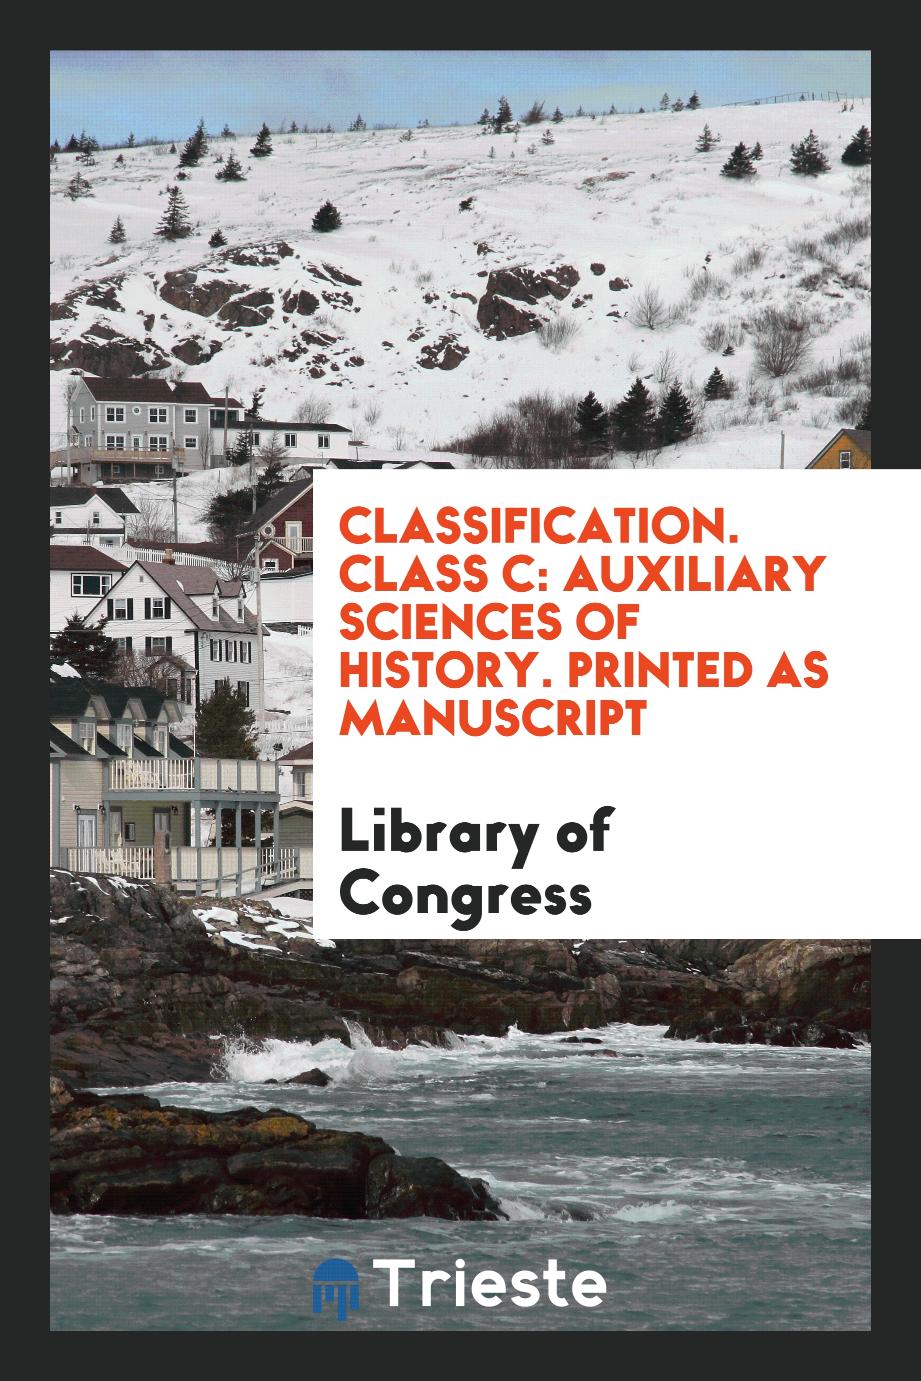 Classification. Class C: Auxiliary Sciences of History. Printed as Manuscript